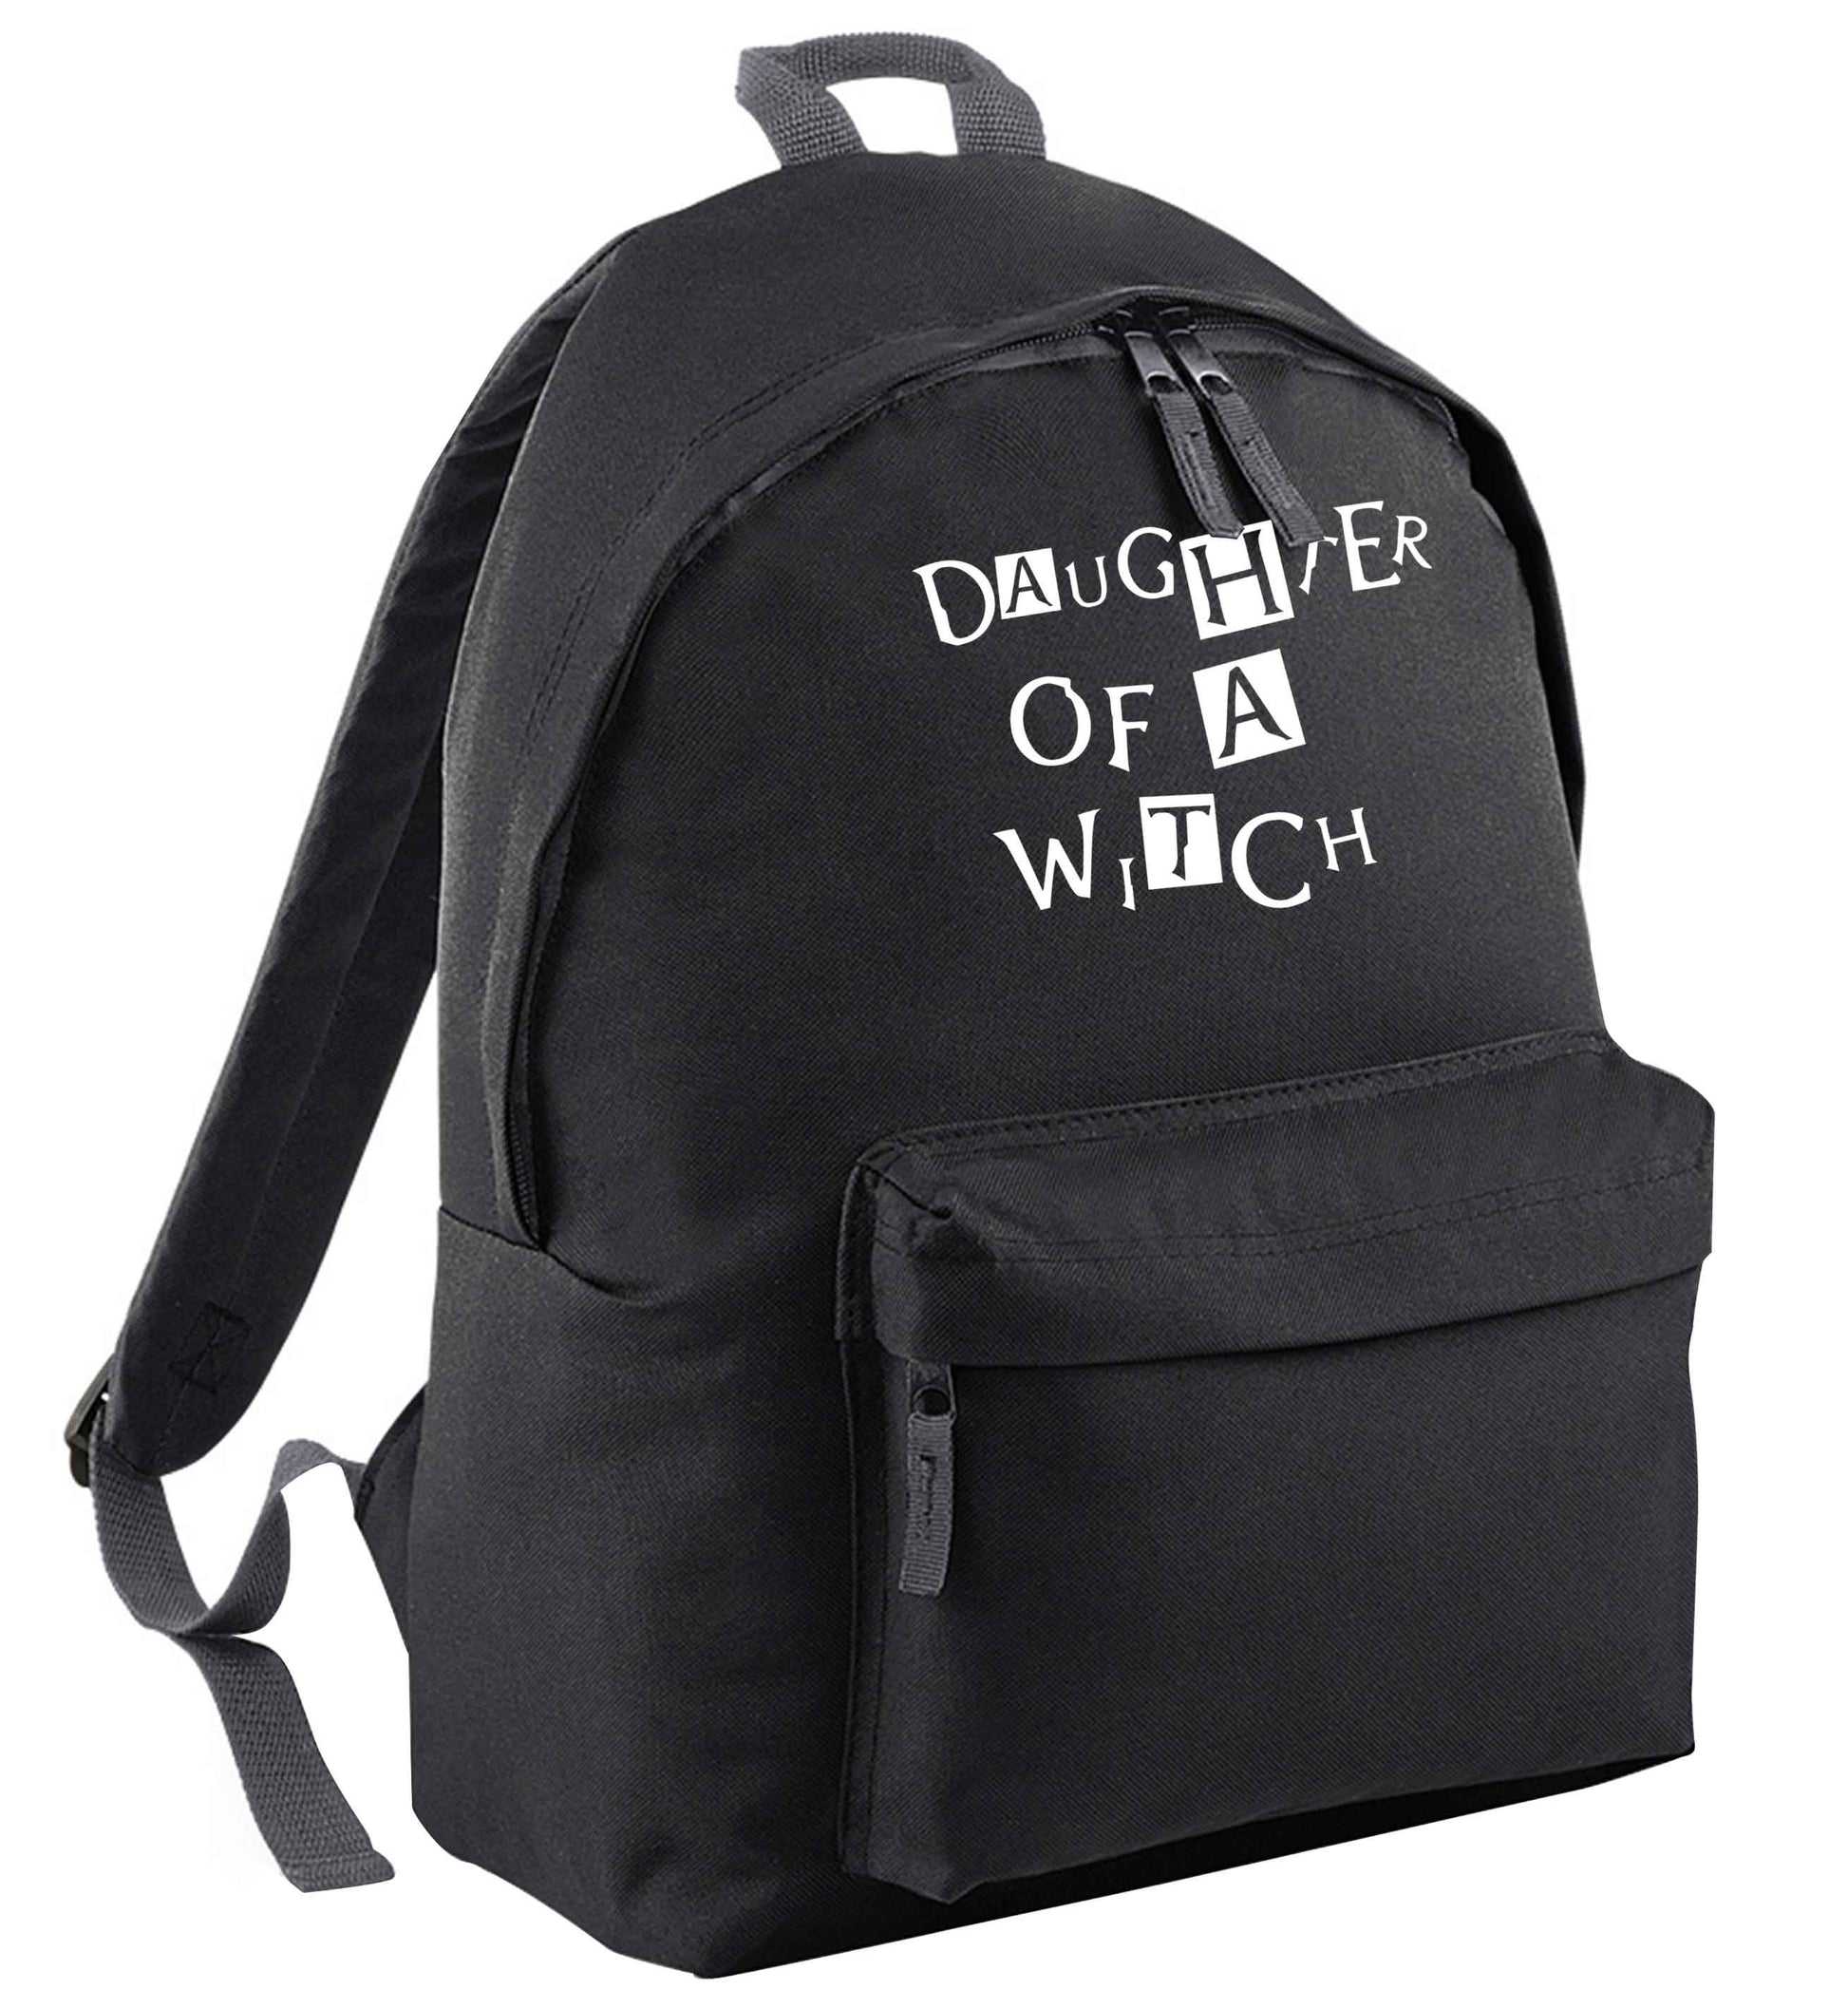 Daughter of a witch black adults backpack